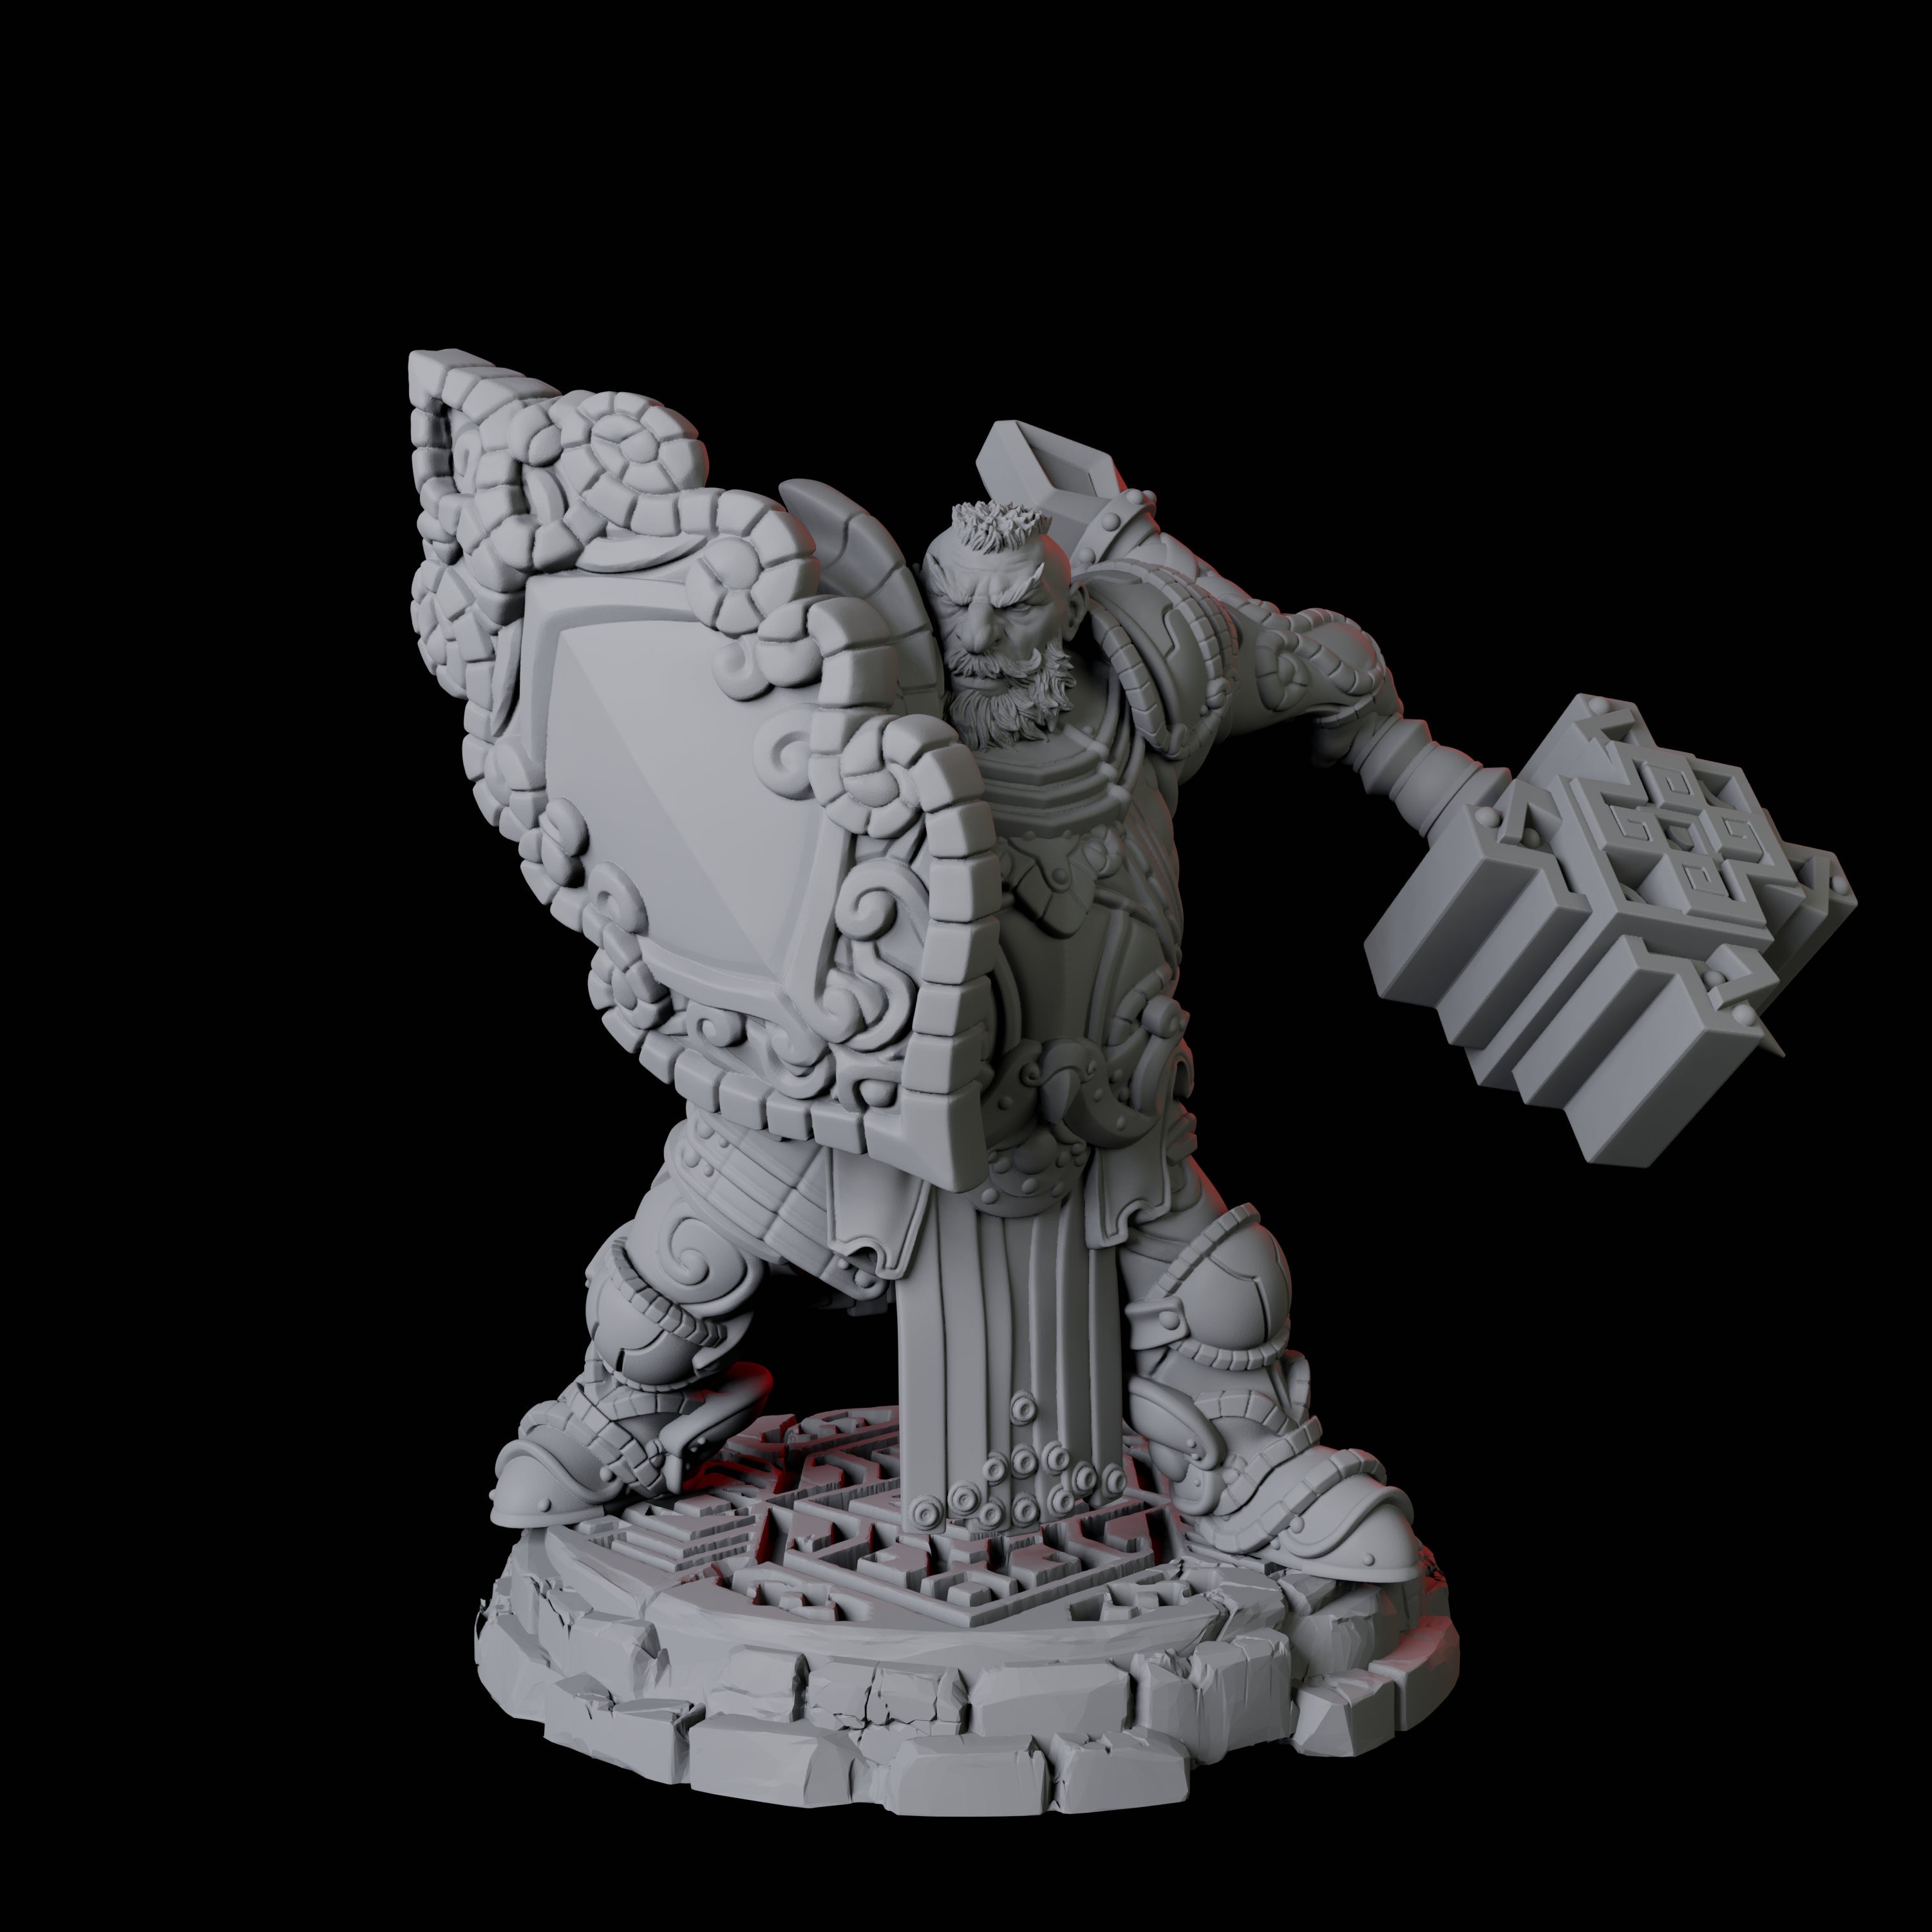 Heavy Armoured Dwarf Warrior C Miniature for Dungeons and Dragons, Pathfinder or other TTRPGs